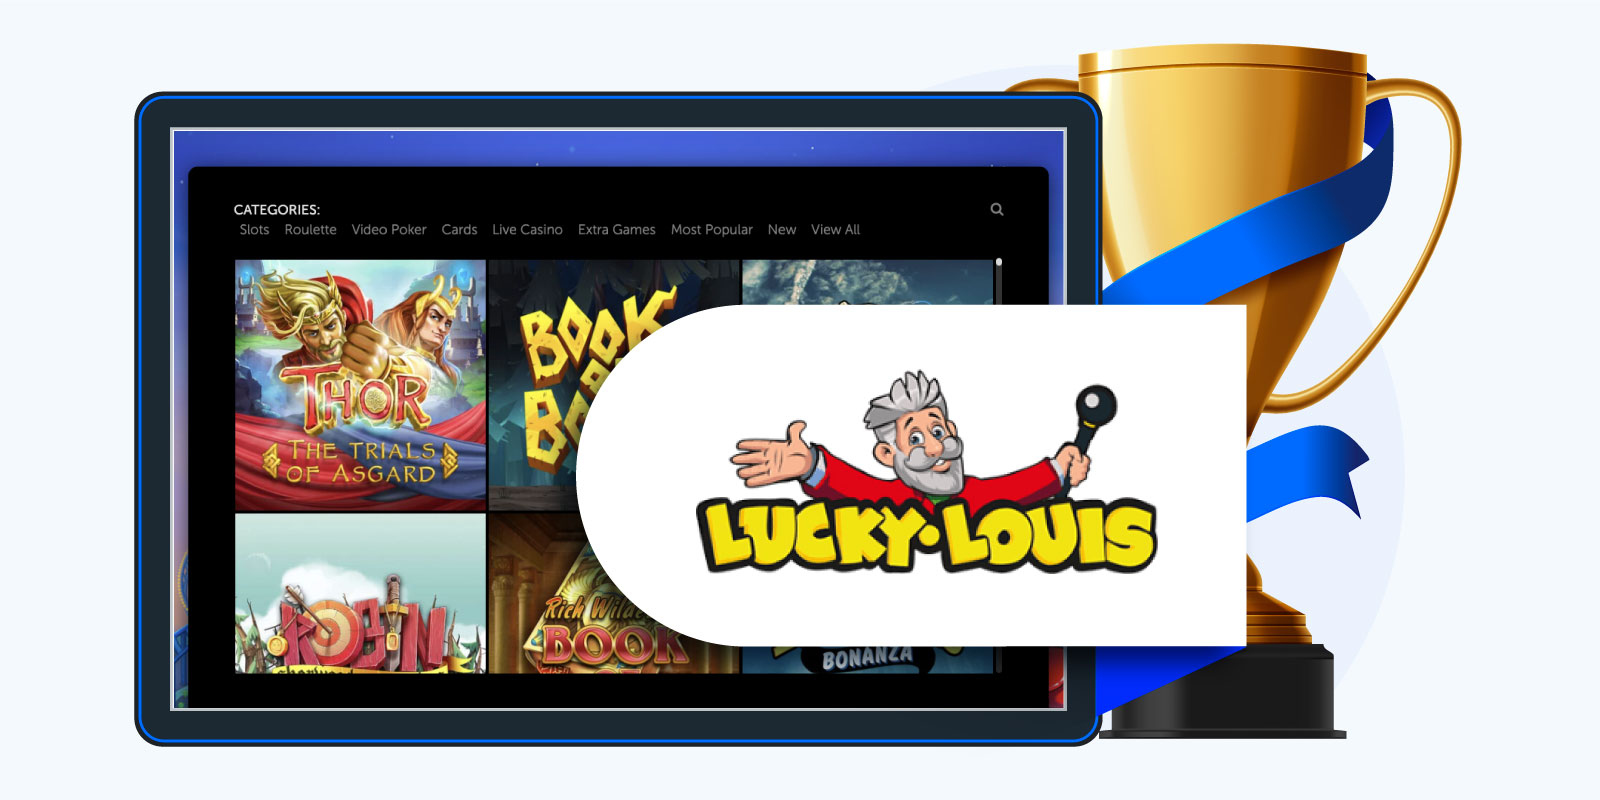 The Best Casino with 10 Euro Deposit in Ireland: Lucky Louis